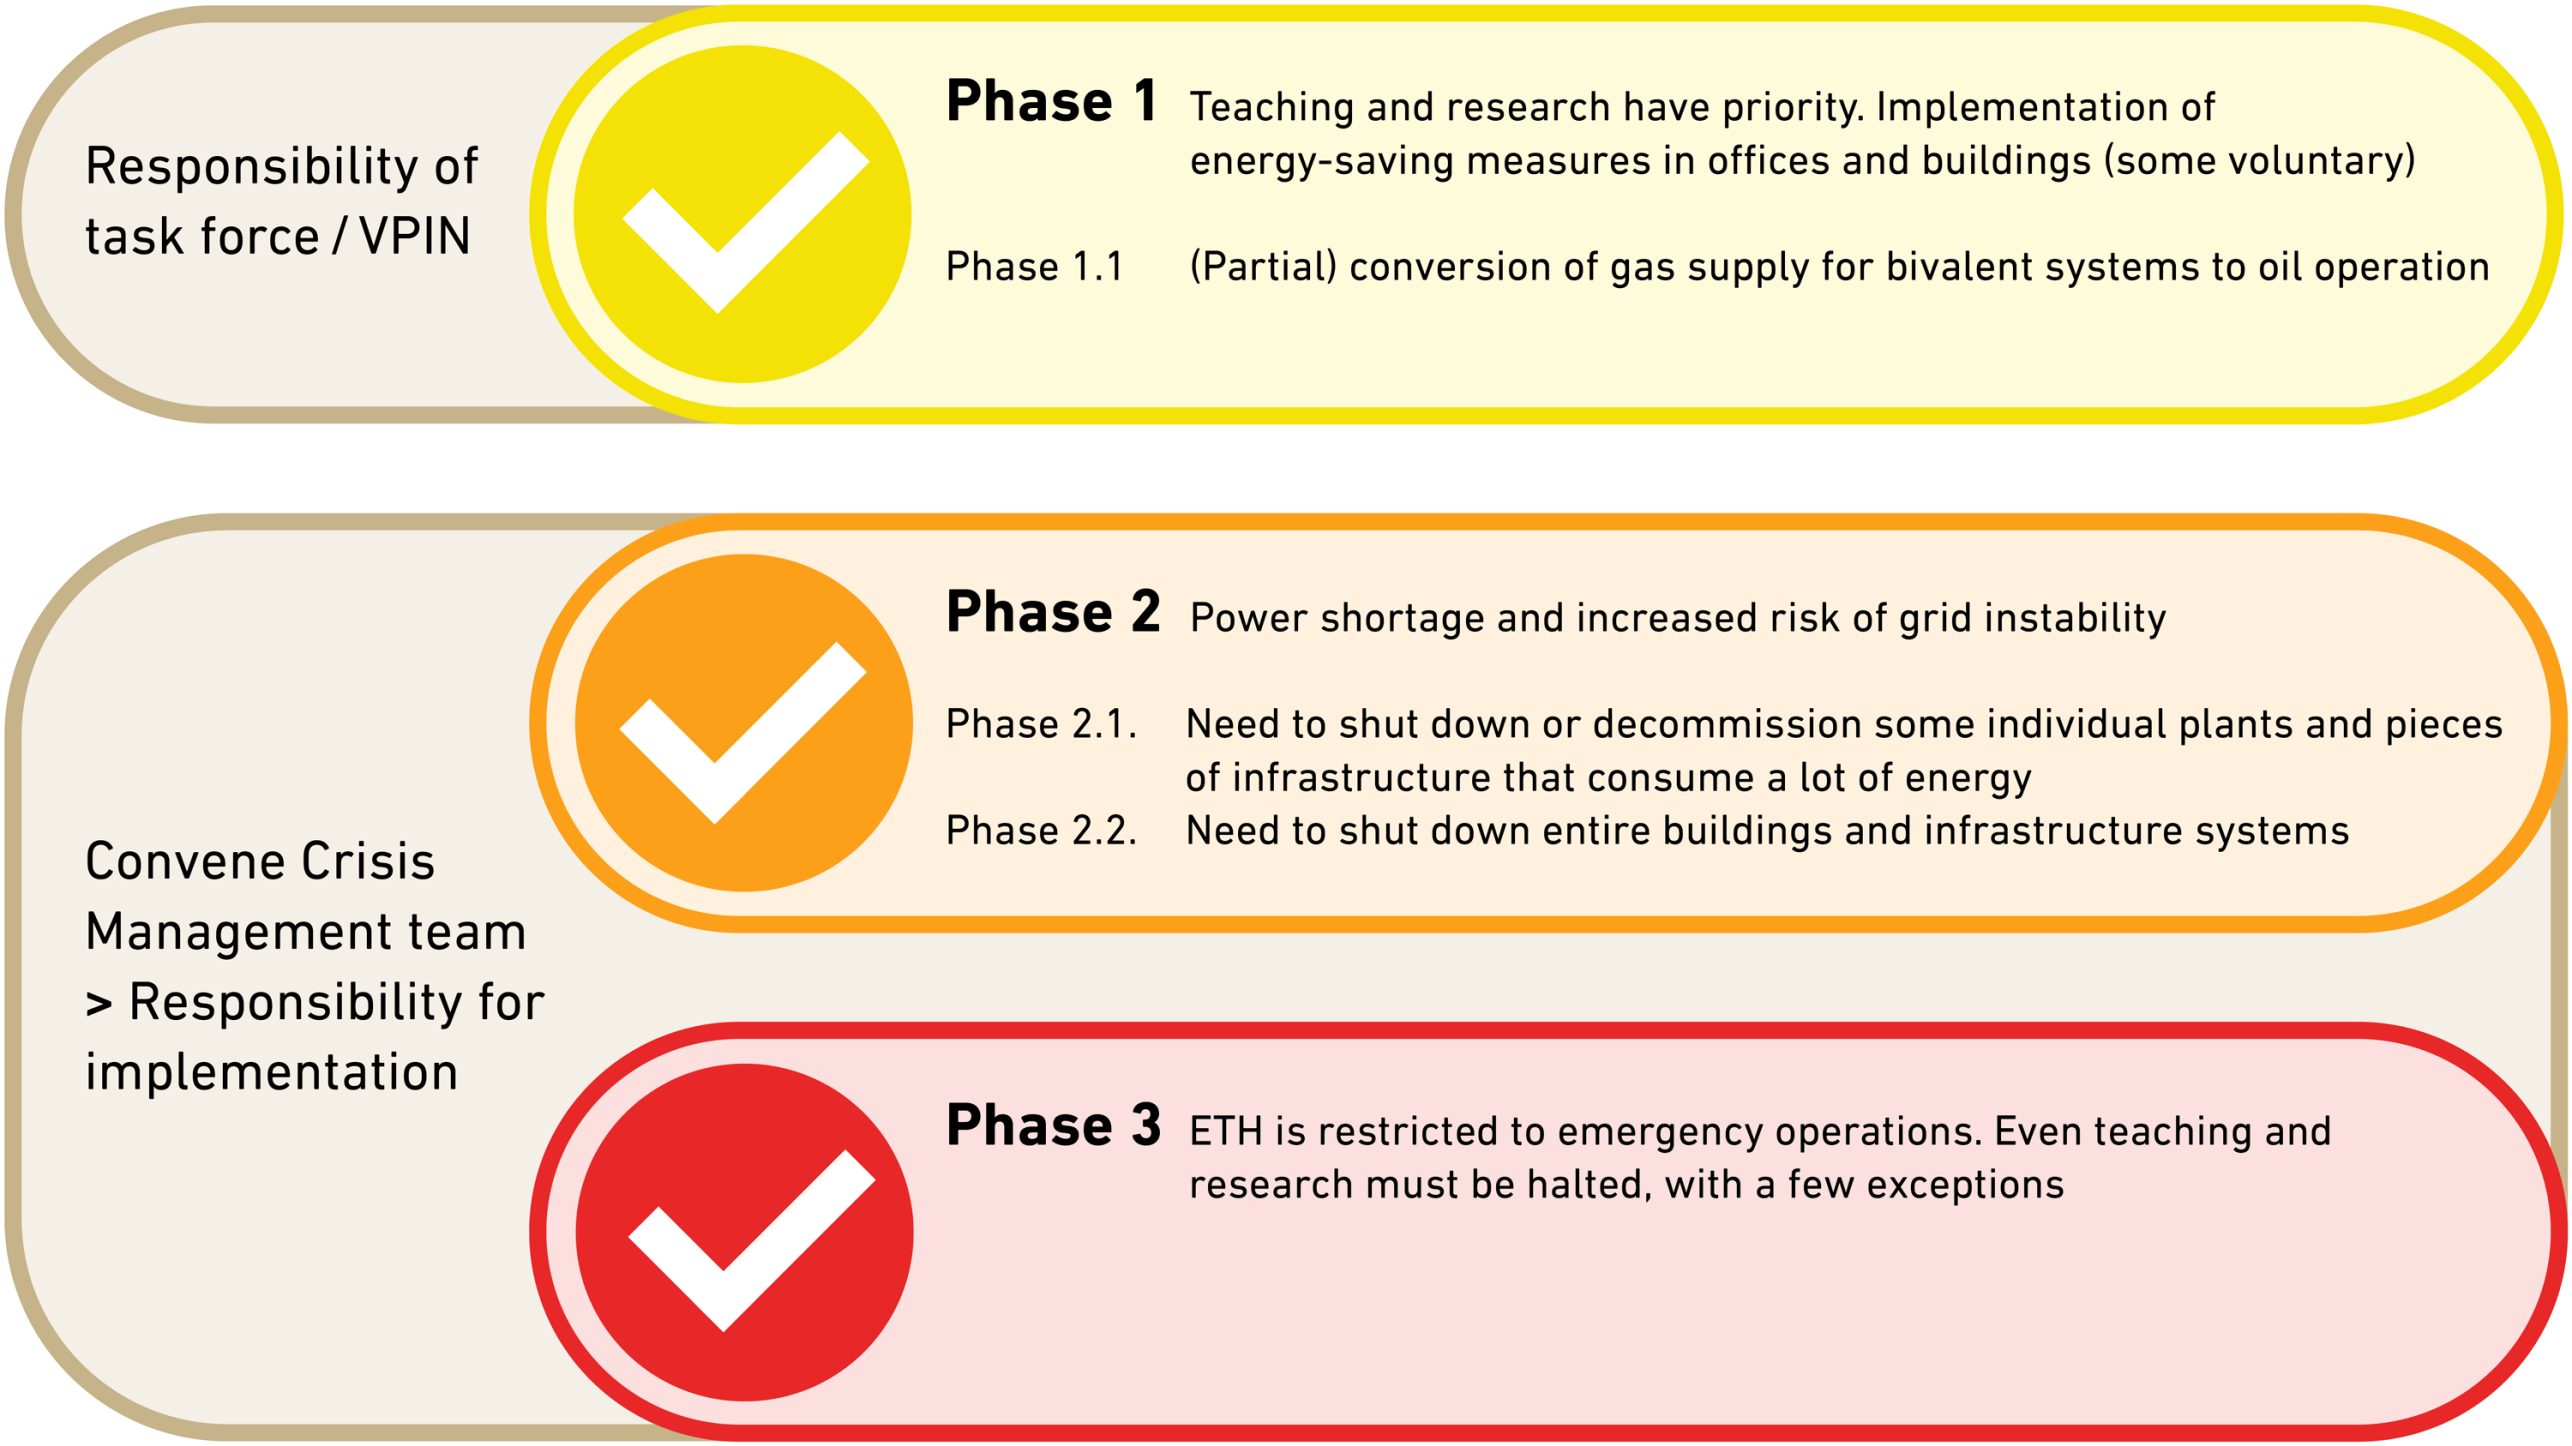 Enlarged view: The graphic illustrates the three phases of energy-saving measures and the conditions under which they come into effect (Phase 1: energy-saving measures in offices and buildings; Phase 2: energy shortage; Phase 3: emergency operations).